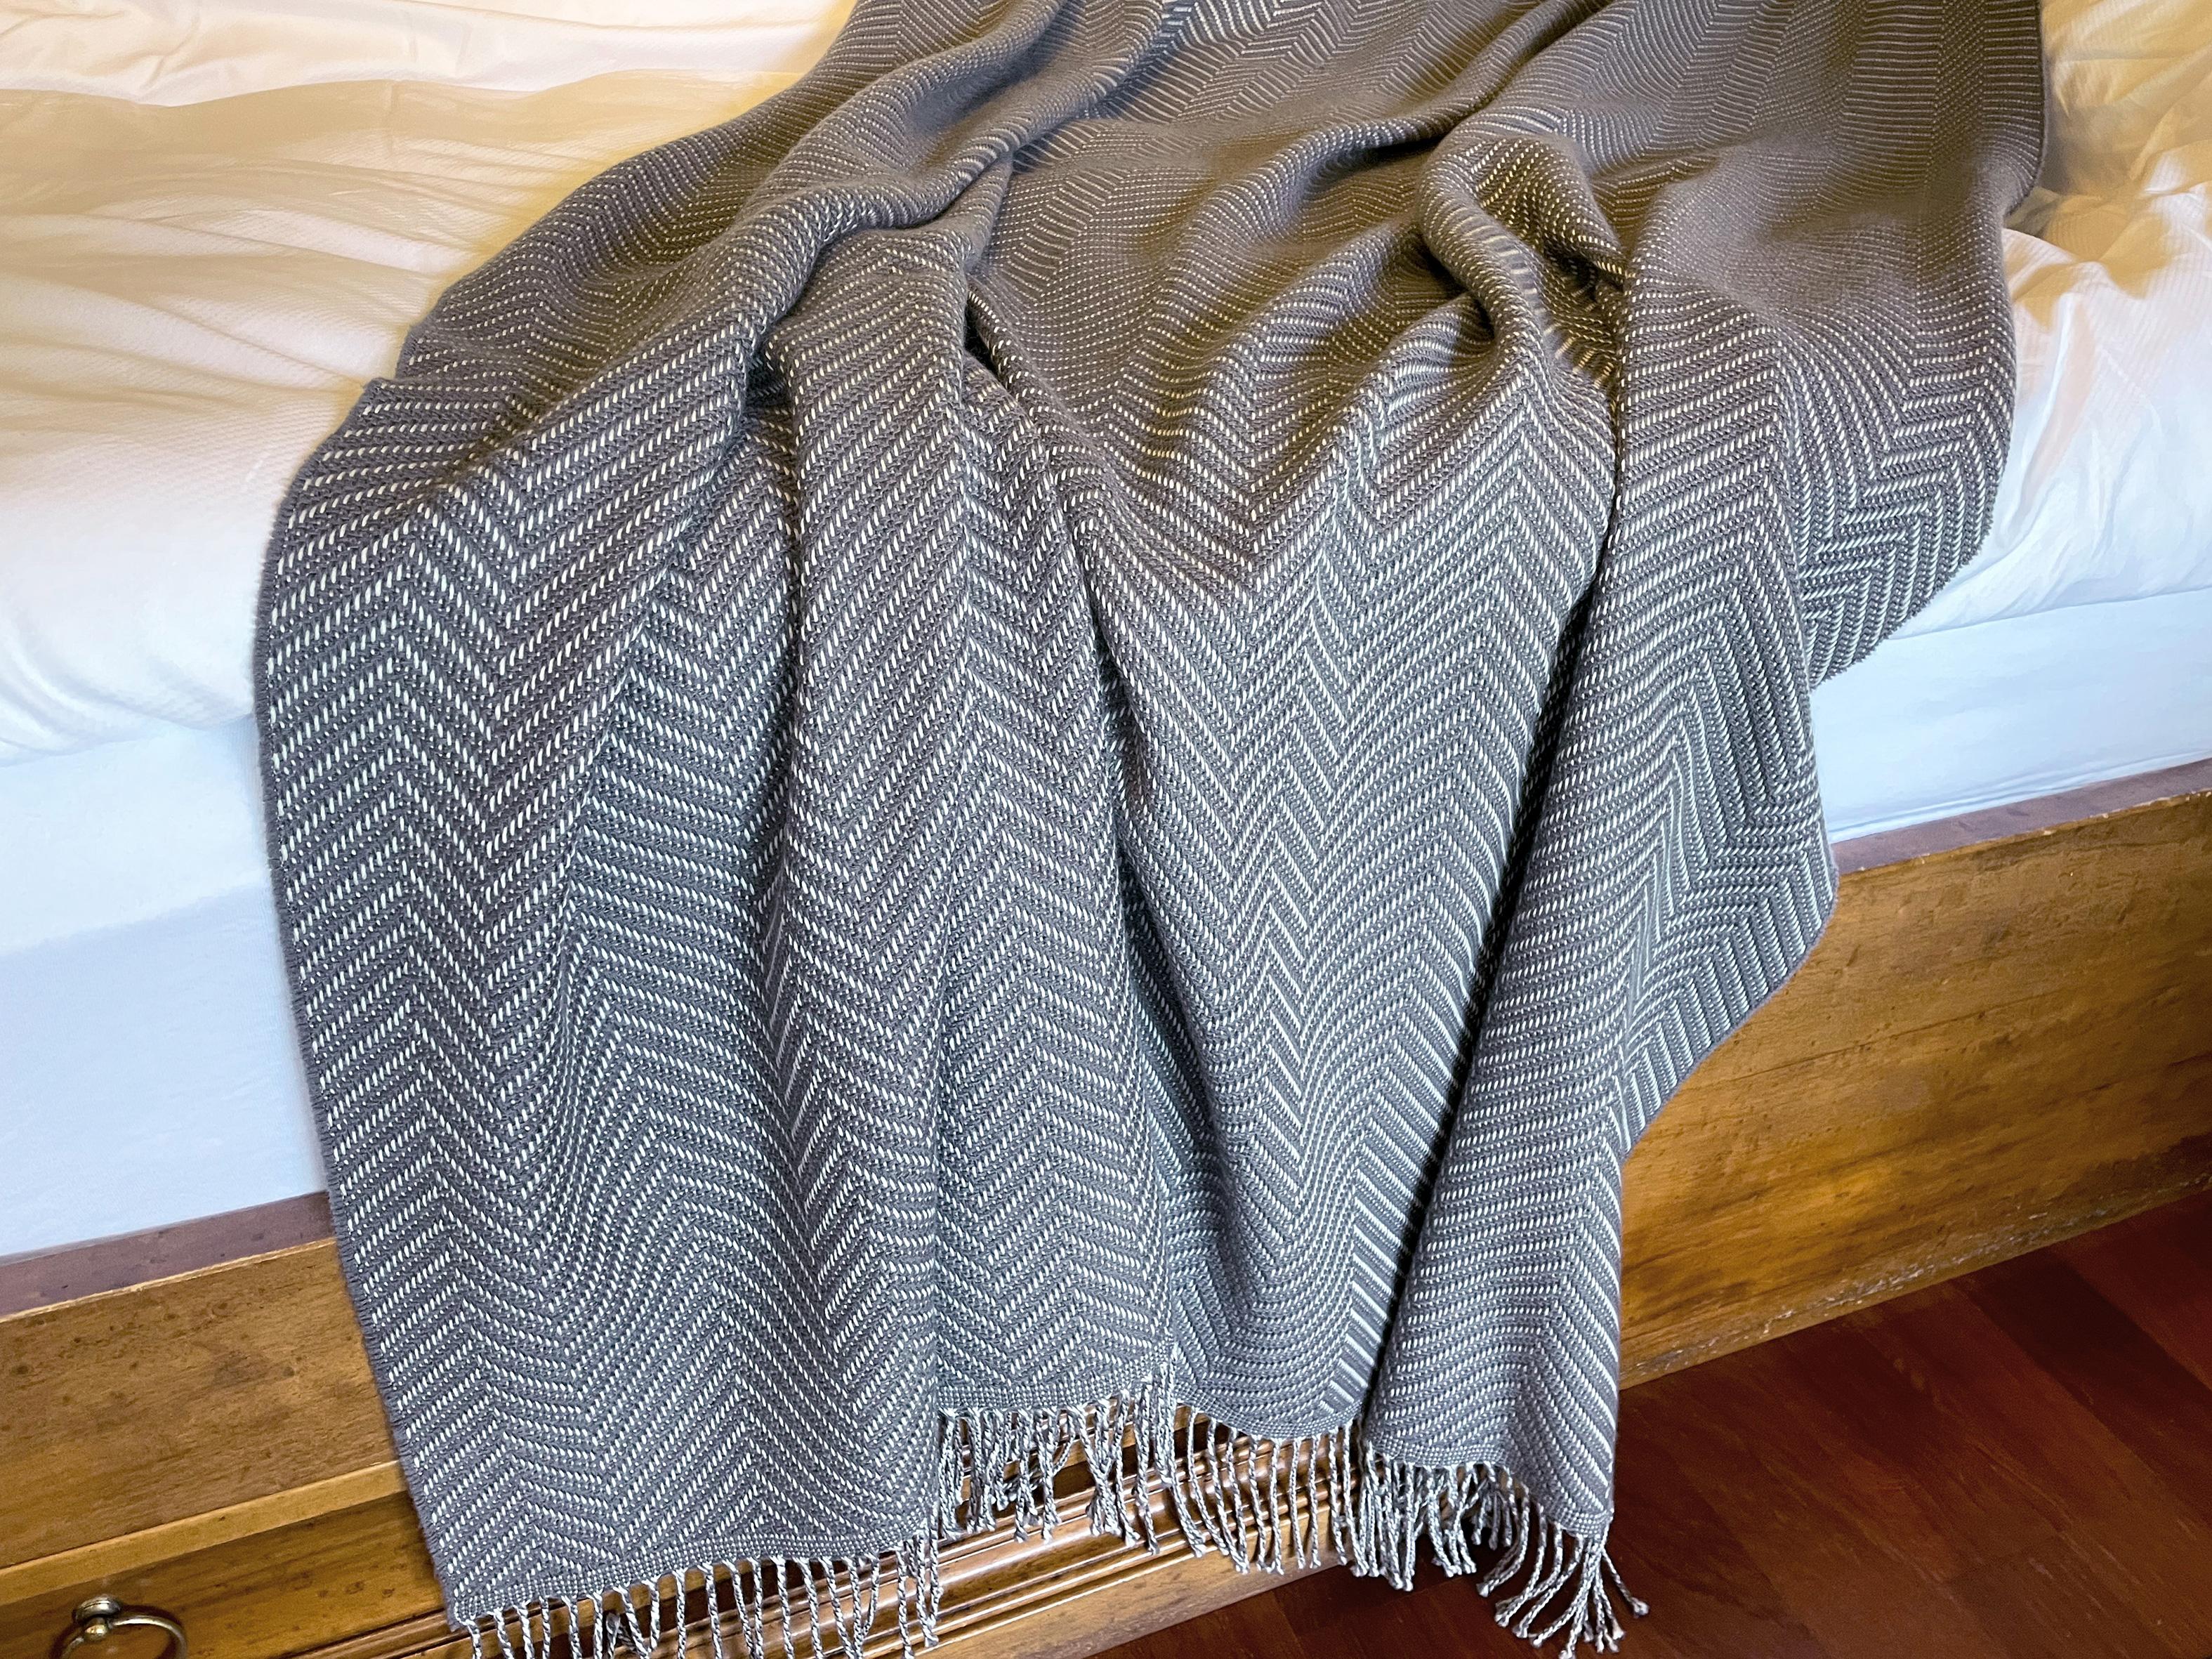 Designed in Berlin by Catharina Mende, woven of 100% extra fine merino in Scotland: This exquisite bed throw in color grey, woven in Scotland from finest extra fine merino, is a piece of beauty and elegance for every bedroom - day and night, winter